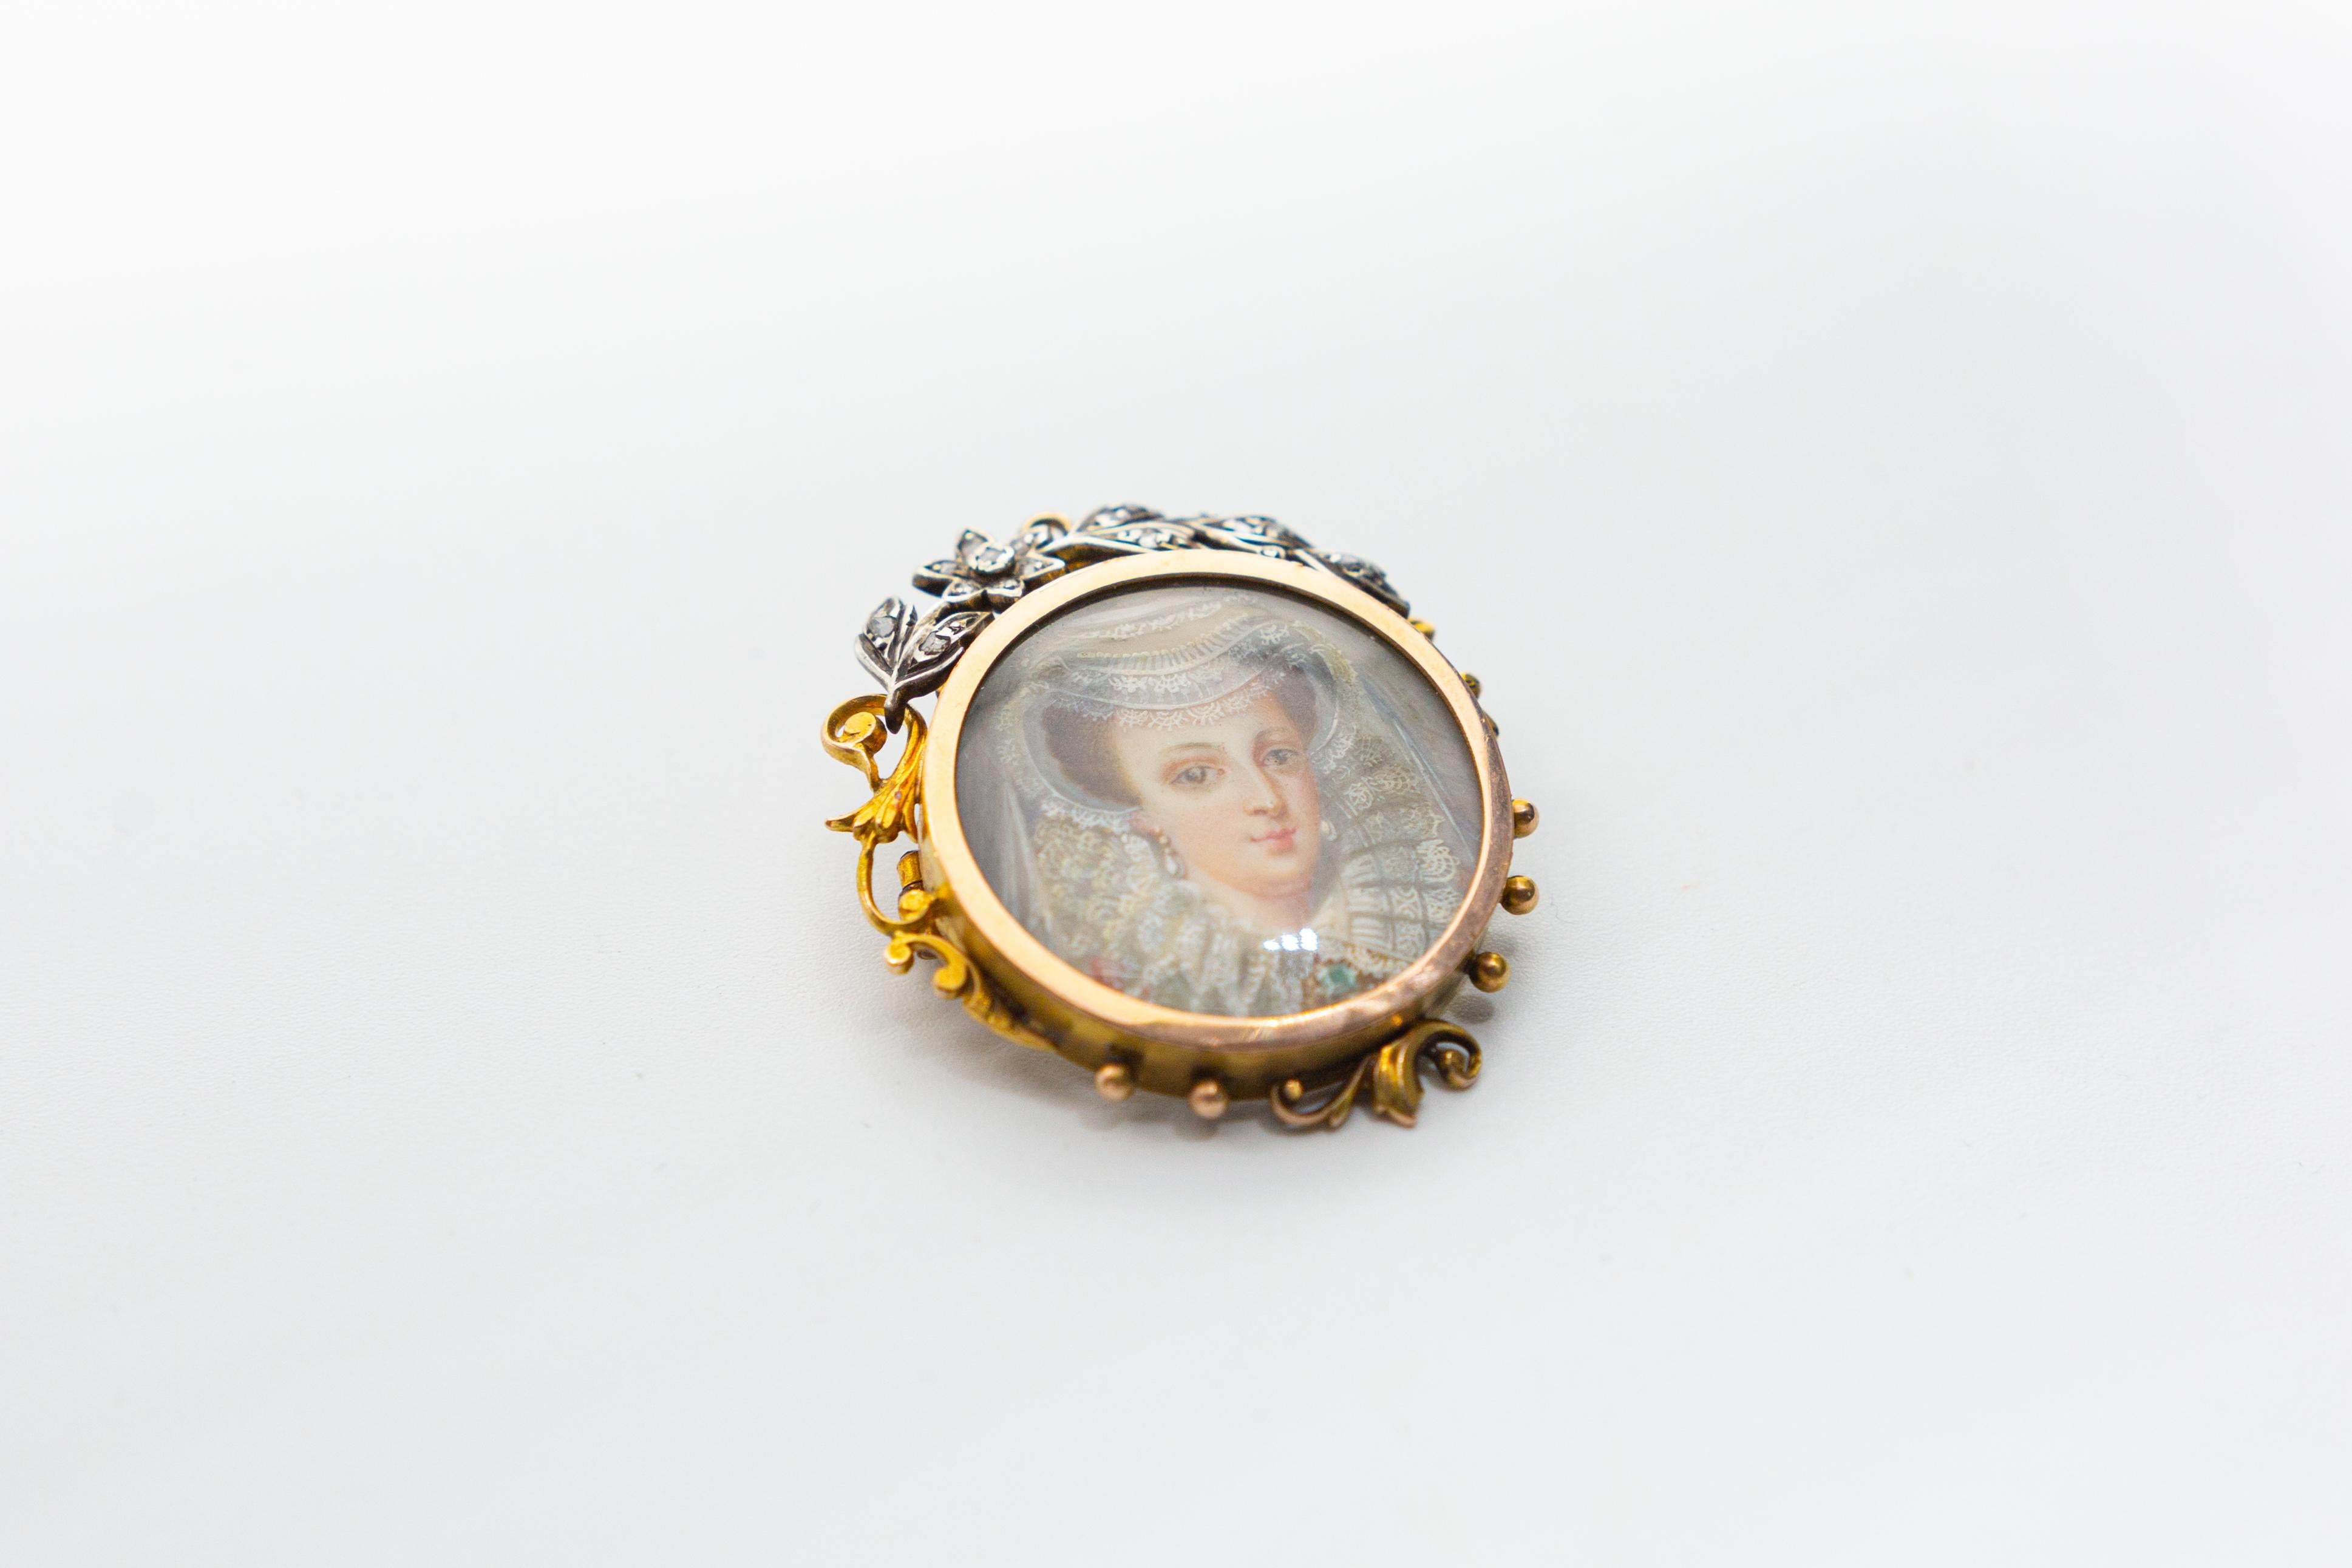 Antique 18 k gold with rose-cut diamonds. The brooch is Victorian. It’s a miniature hand-painted painting on mother of pearl back. It measures 1.5 inches in height and measures 1.35 inches wide. it weighs 1,72 grams. It does have a loop on which one